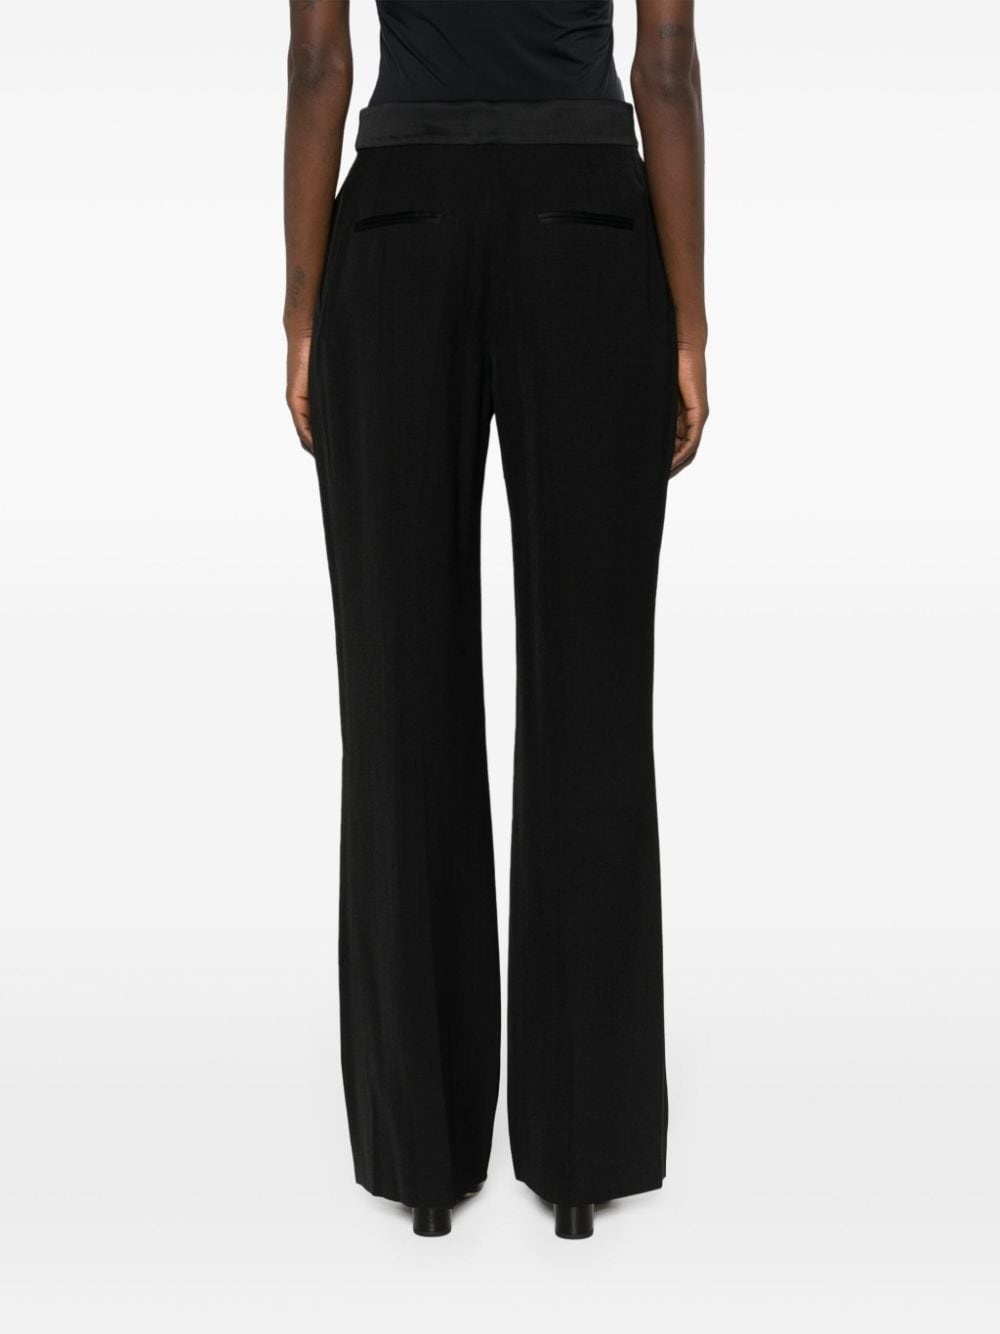 pressed-crease long-length straight-leg trousers - 4